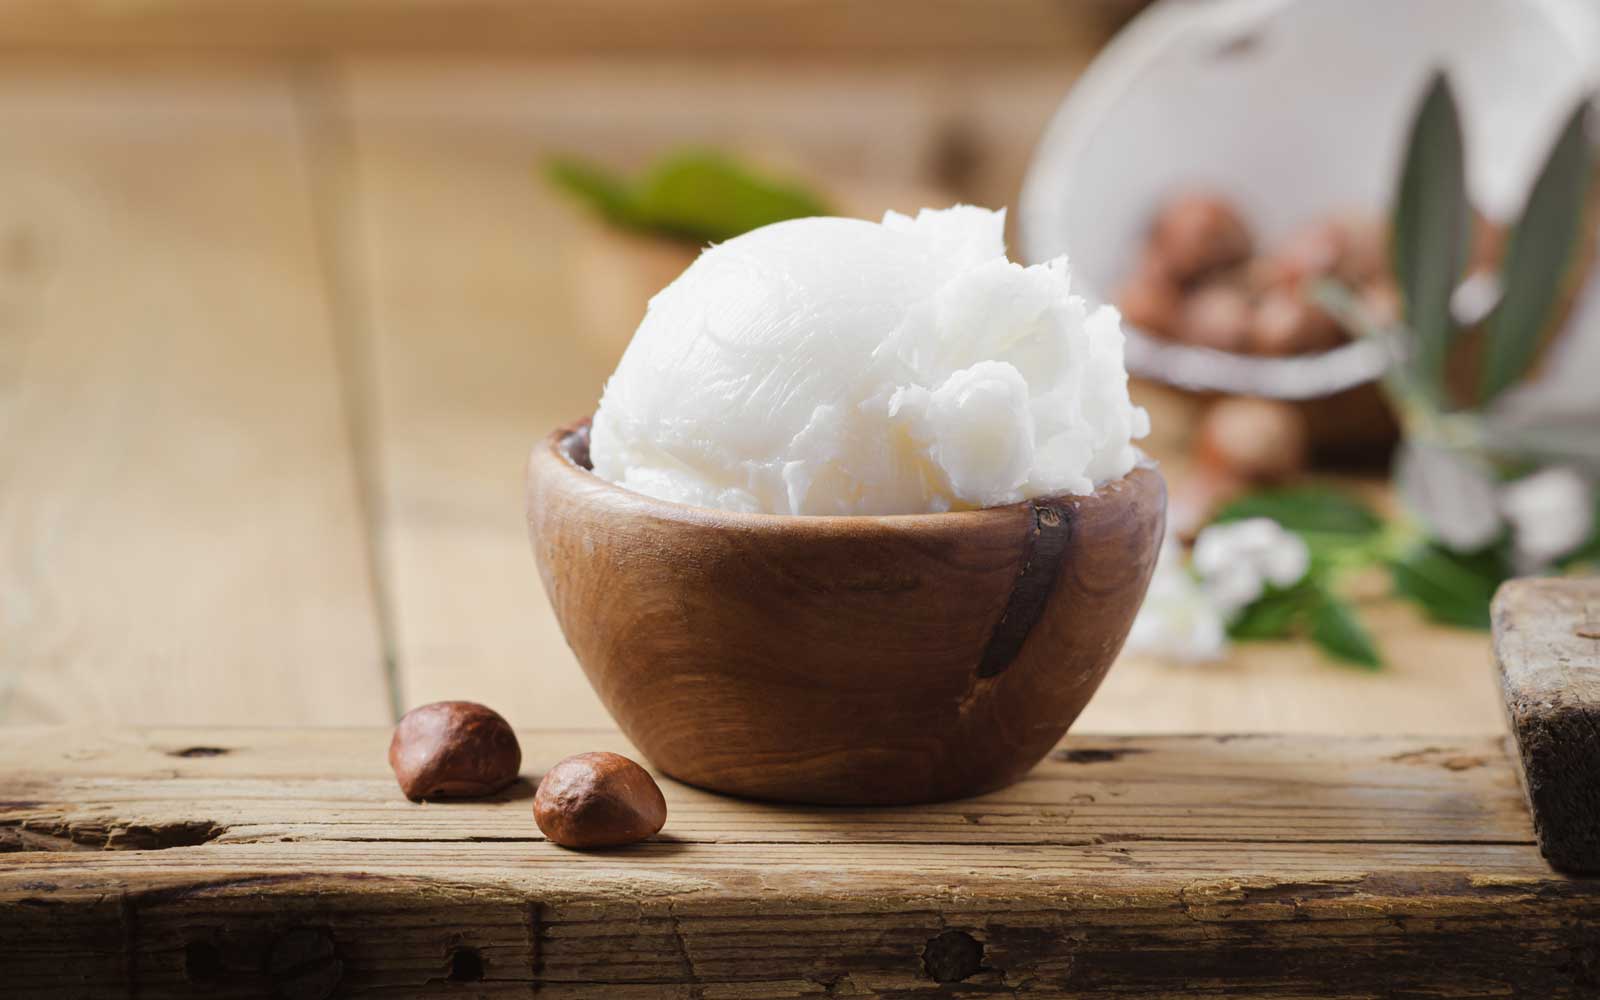 The Benefits of Shea Butter for Skin – Bee Clean Soaps